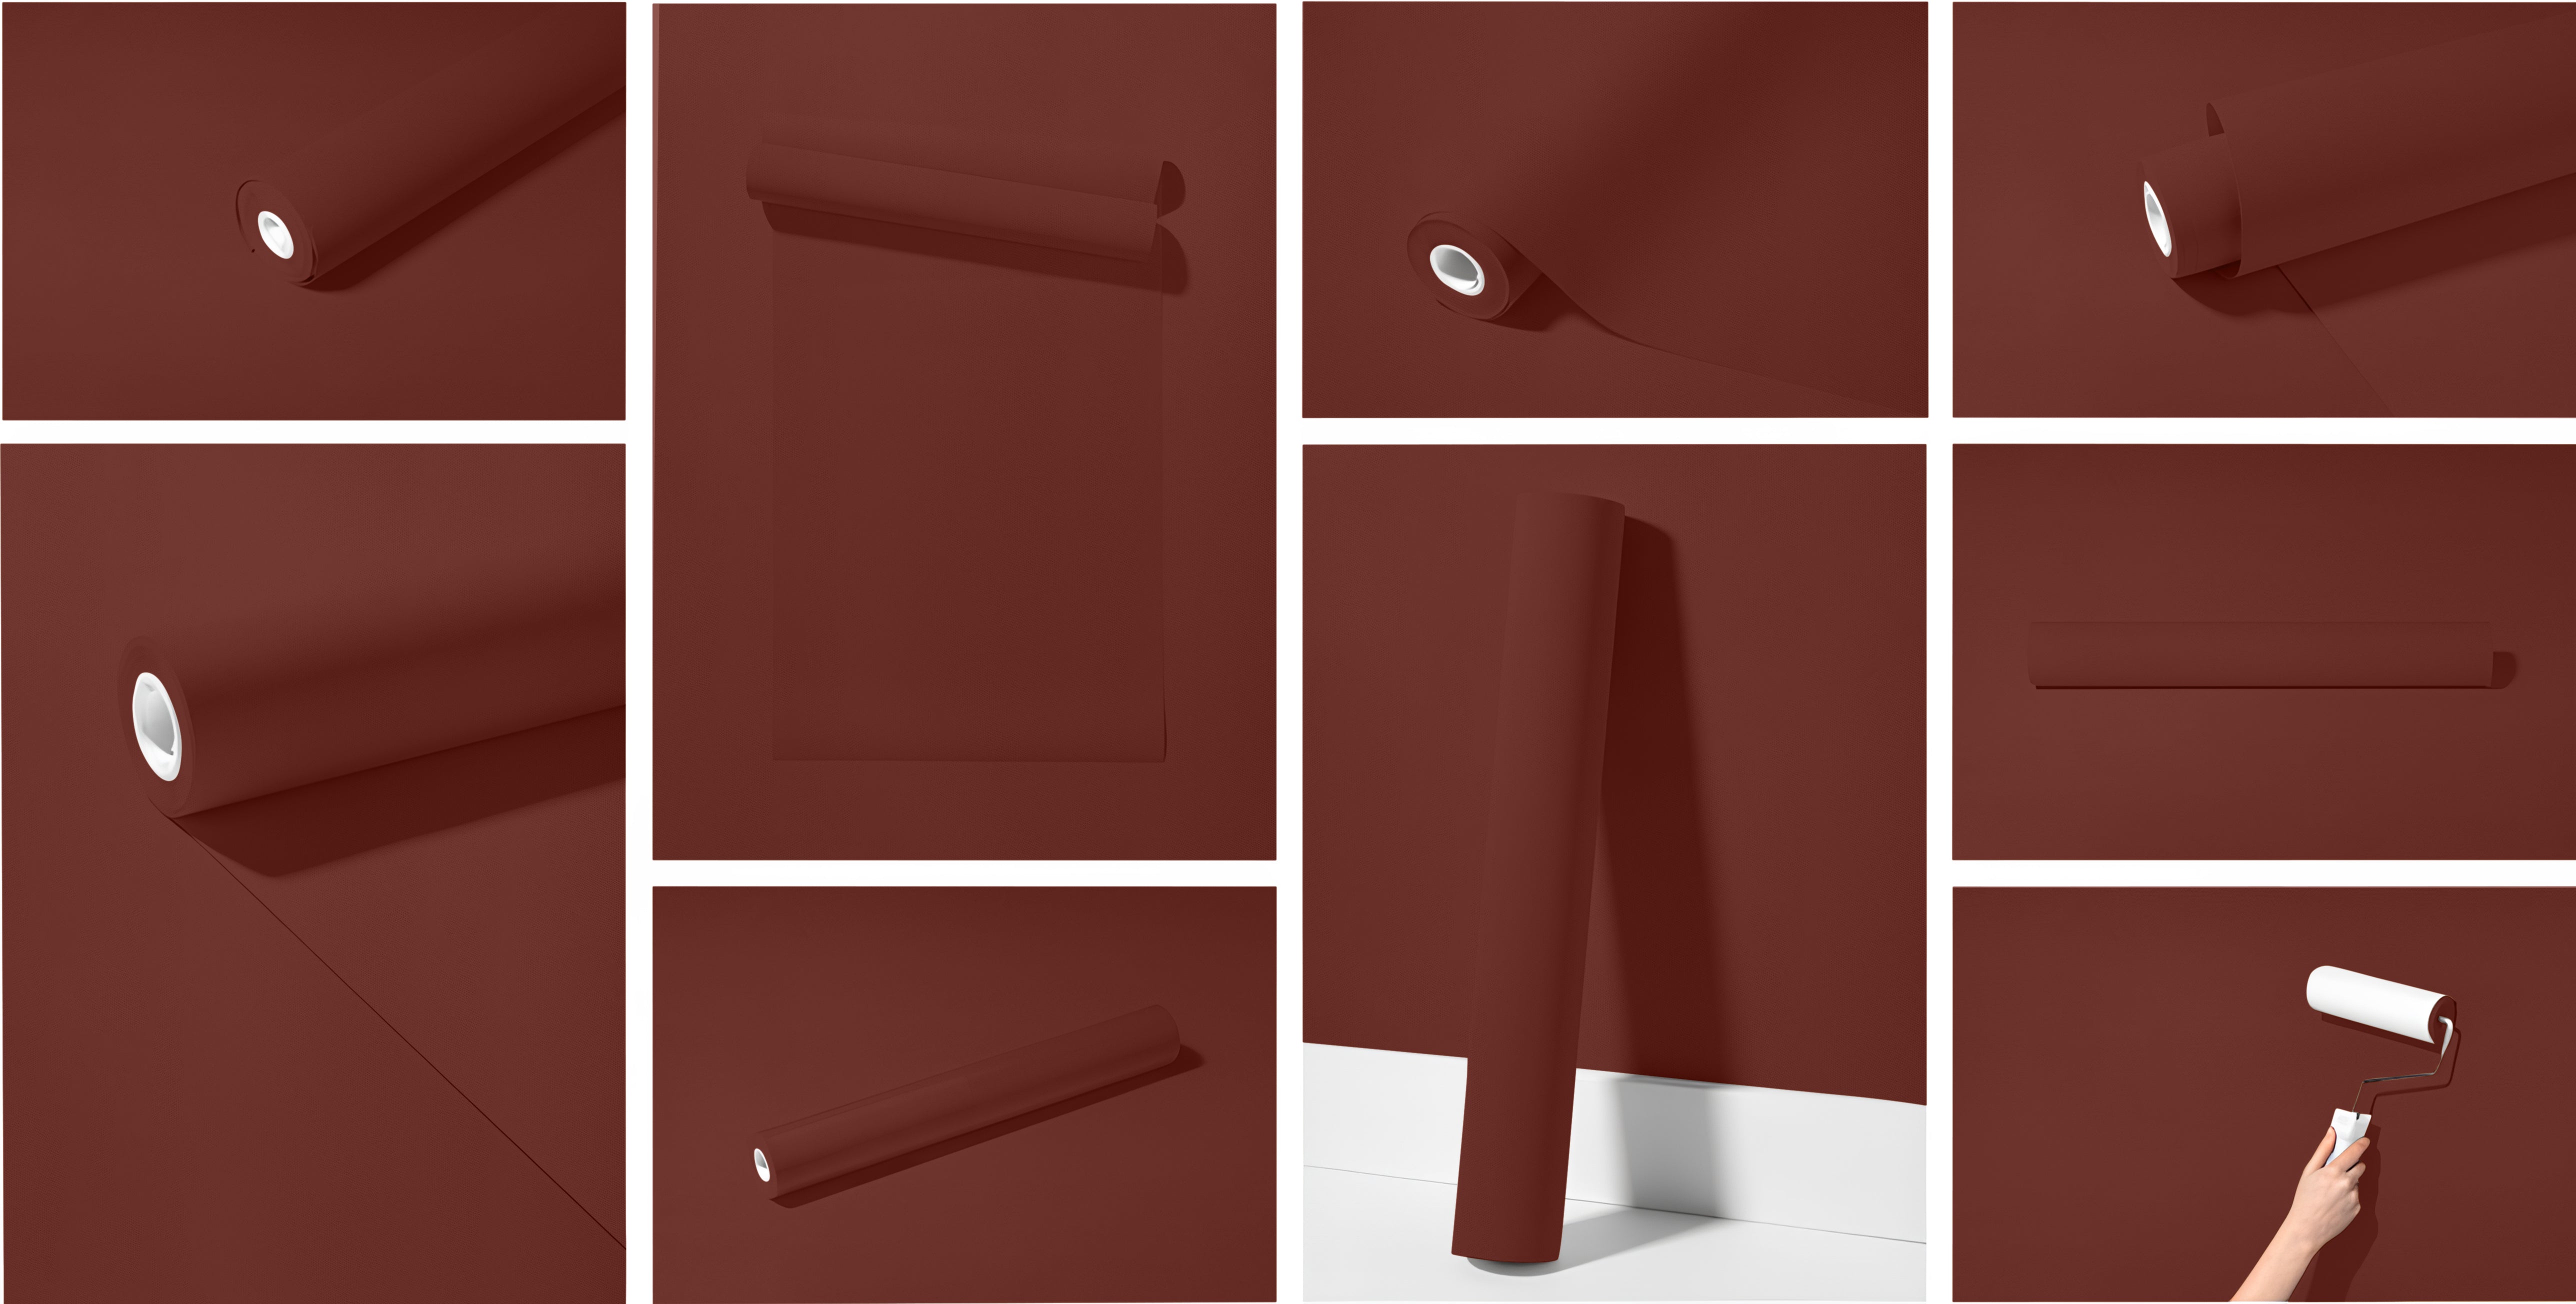 Peel & Stick Removable Re-usable Paint - Color RAL 3009 Oxide Red - offRAL™ - RALRAW LLC, USA